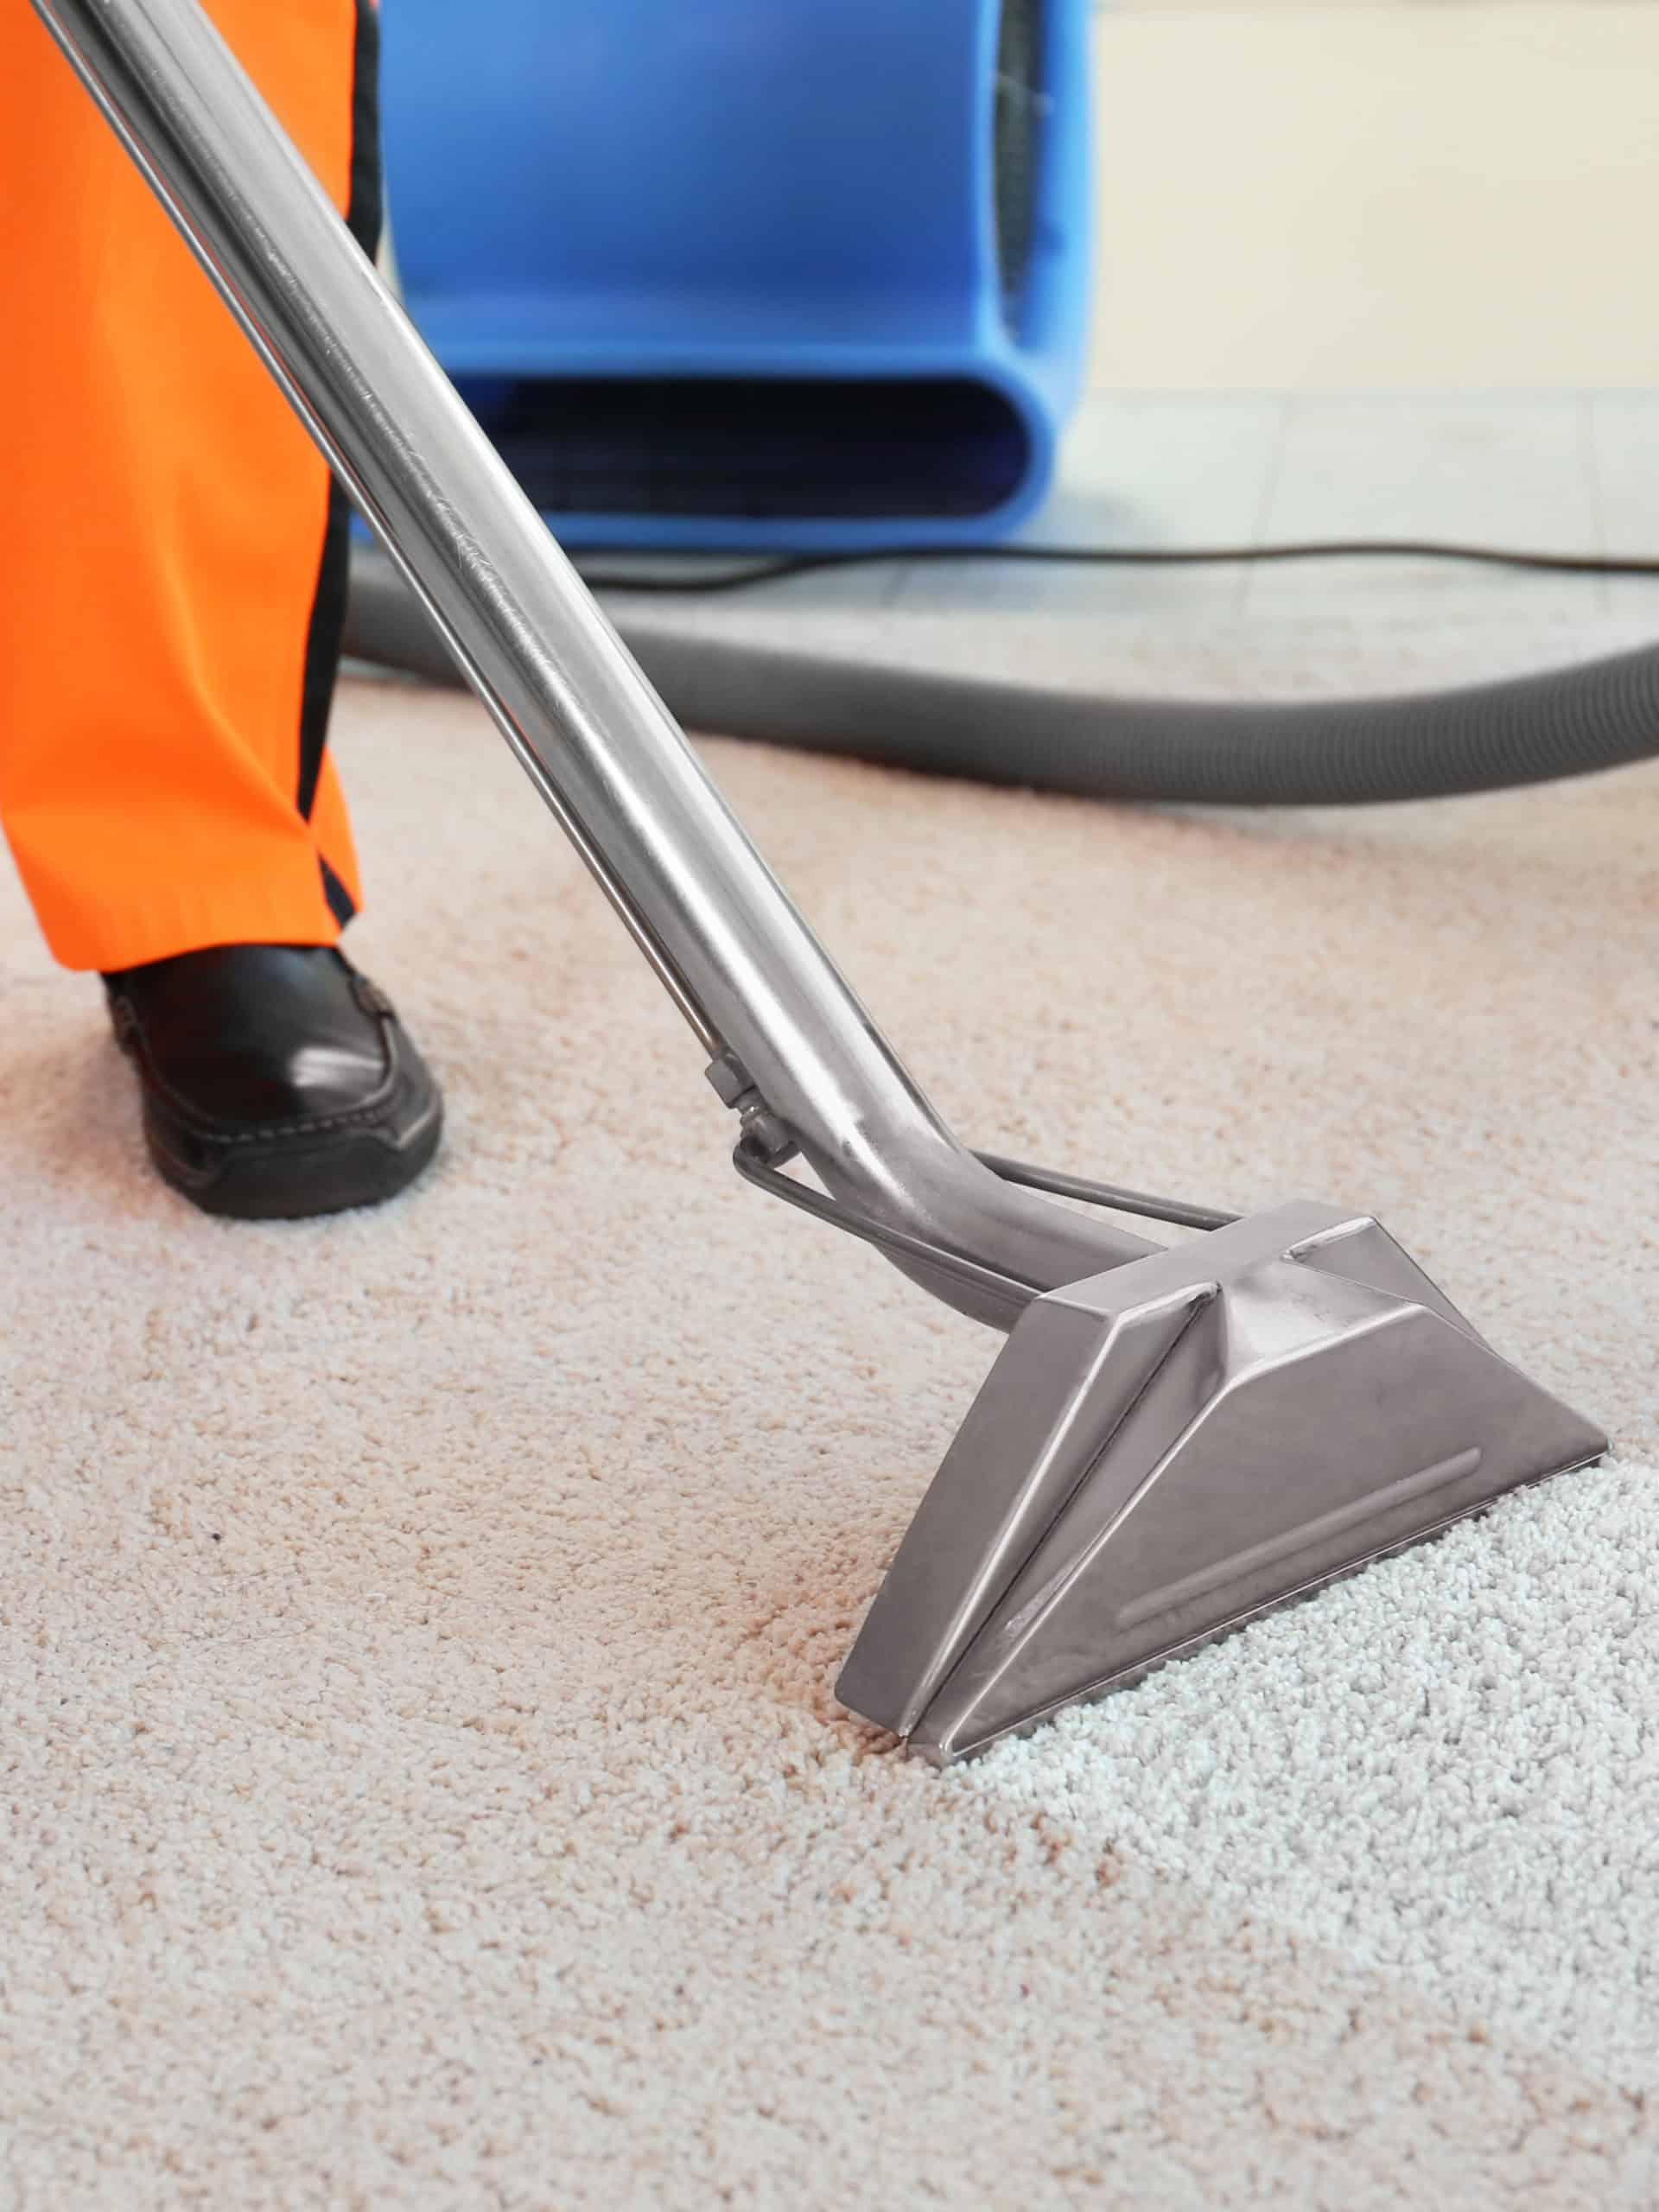 Cleaning service concept. Dry cleaner's employee removing dirt from carpet in flat, closeup